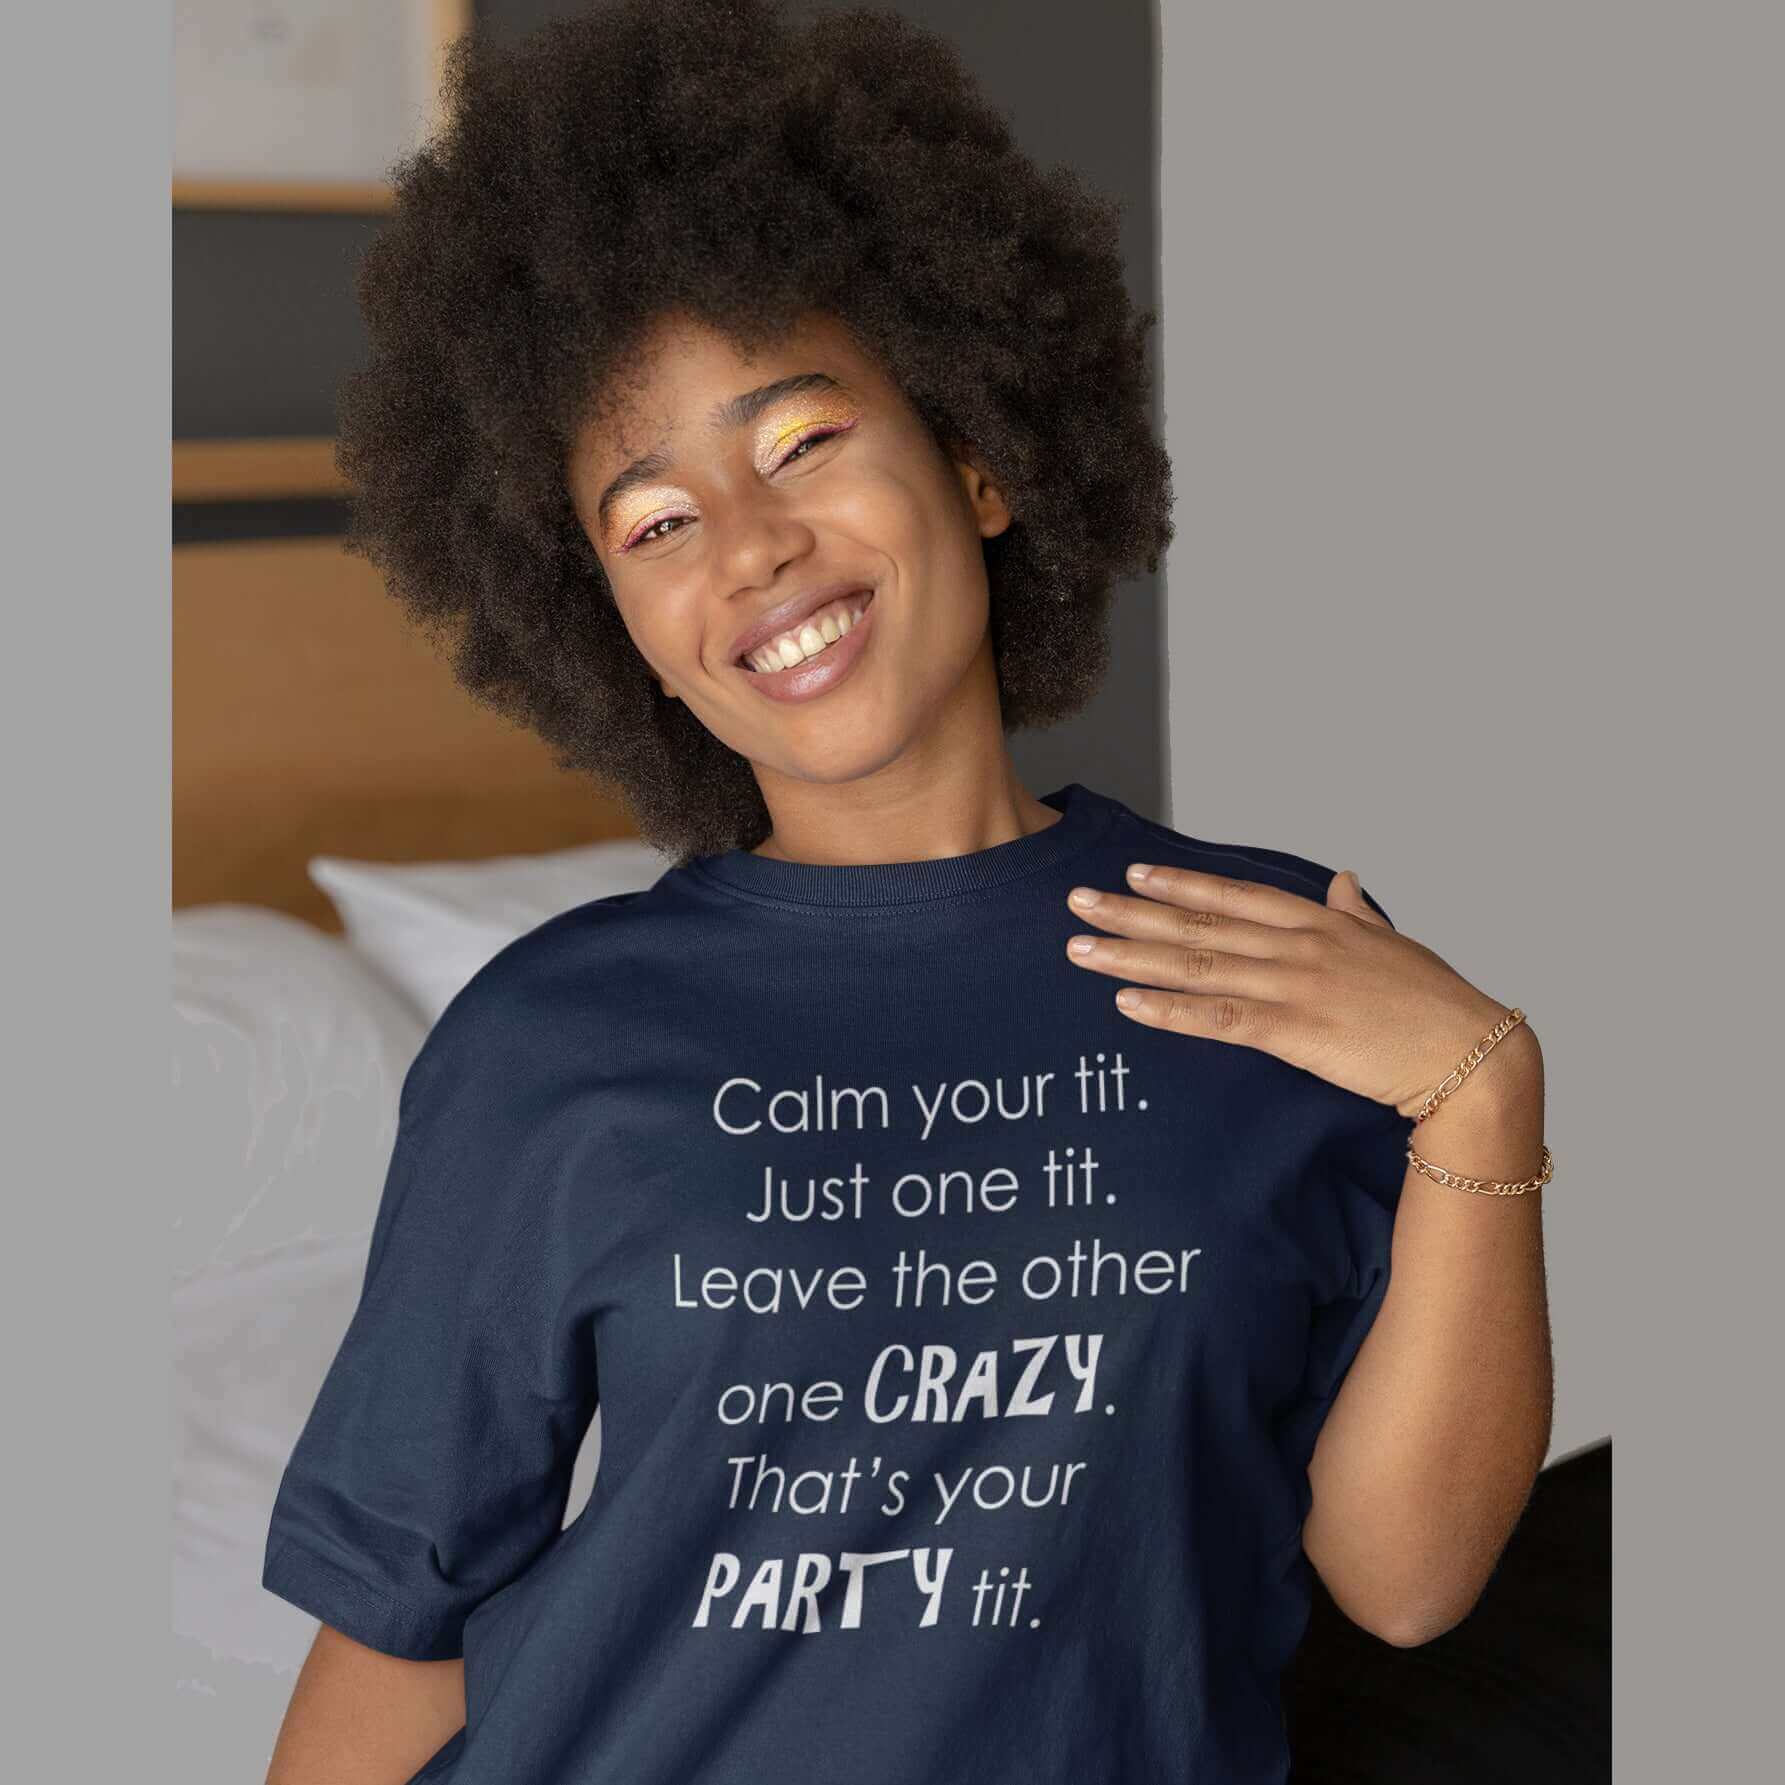 Woman wearing a navy blue t-shirt with the funny phrase Calm your tit, just one tit. Leave the other one crazy, that's your party tit printed on the front.